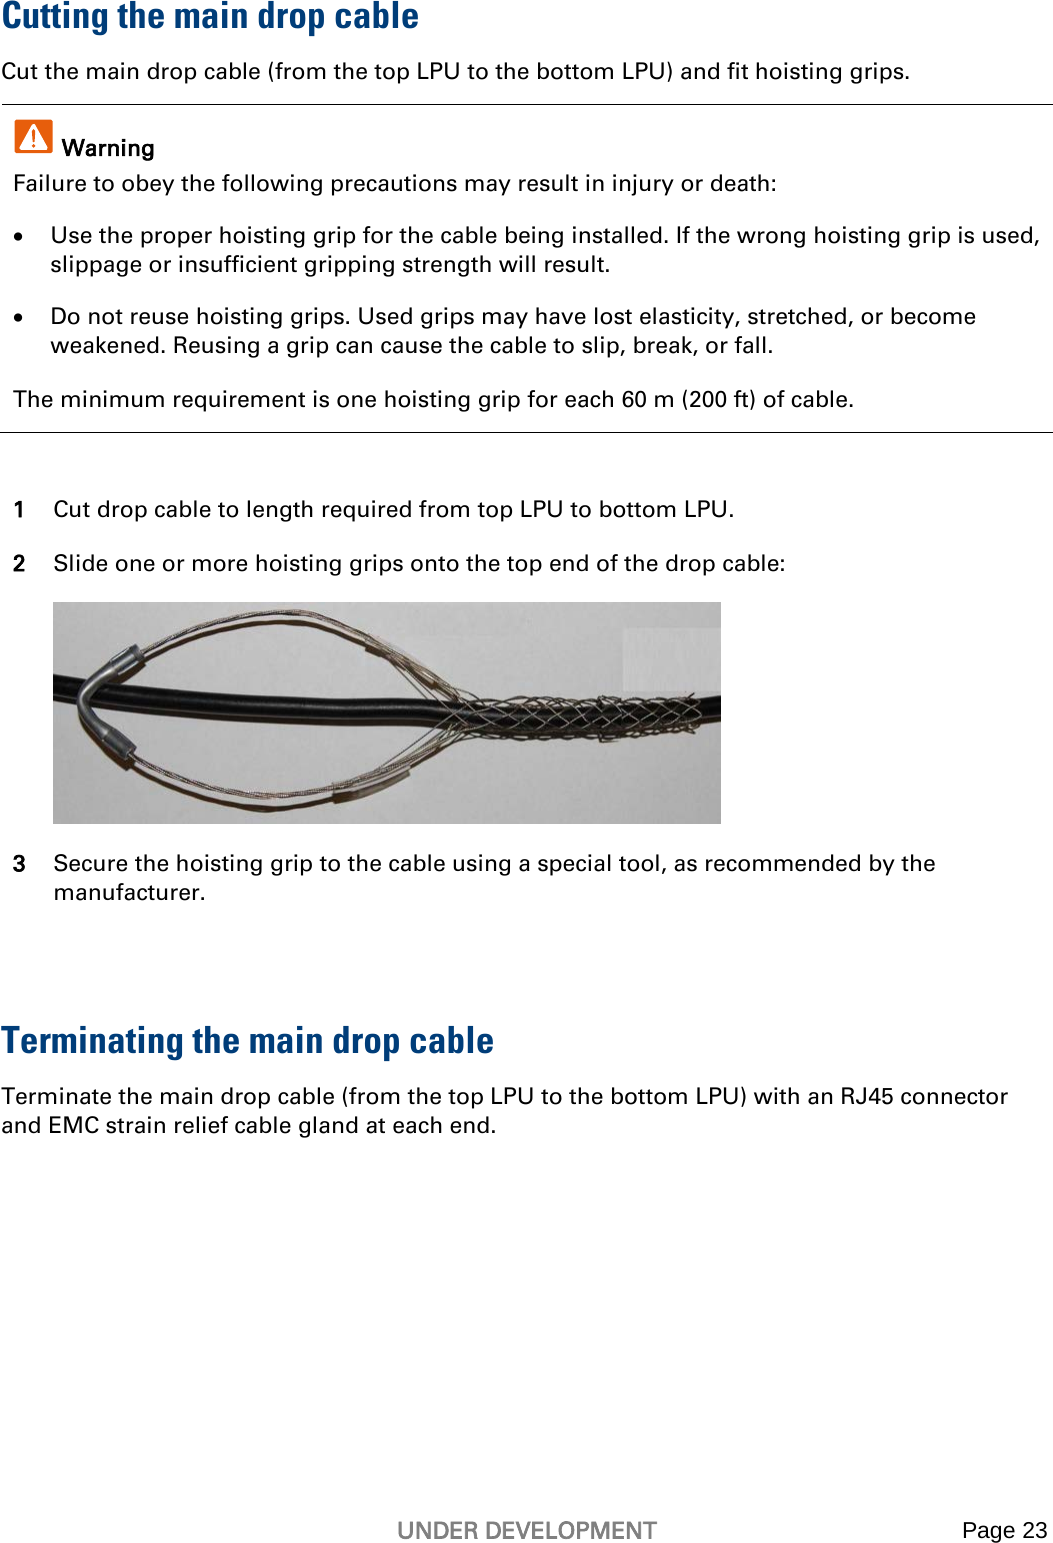   UNDER DEVELOPMENT Page 23   Cutting the main drop cable Cut the main drop cable (from the top LPU to the bottom LPU) and fit hoisting grips.  Warning Failure to obey the following precautions may result in injury or death: • Use the proper hoisting grip for the cable being installed. If the wrong hoisting grip is used, slippage or insufficient gripping strength will result. • Do not reuse hoisting grips. Used grips may have lost elasticity, stretched, or become weakened. Reusing a grip can cause the cable to slip, break, or fall. The minimum requirement is one hoisting grip for each 60 m (200 ft) of cable.  1 Cut drop cable to length required from top LPU to bottom LPU. 2 Slide one or more hoisting grips onto the top end of the drop cable:  3 Secure the hoisting grip to the cable using a special tool, as recommended by the manufacturer.  Terminating the main drop cable Terminate the main drop cable (from the top LPU to the bottom LPU) with an RJ45 connector and EMC strain relief cable gland at each end. 